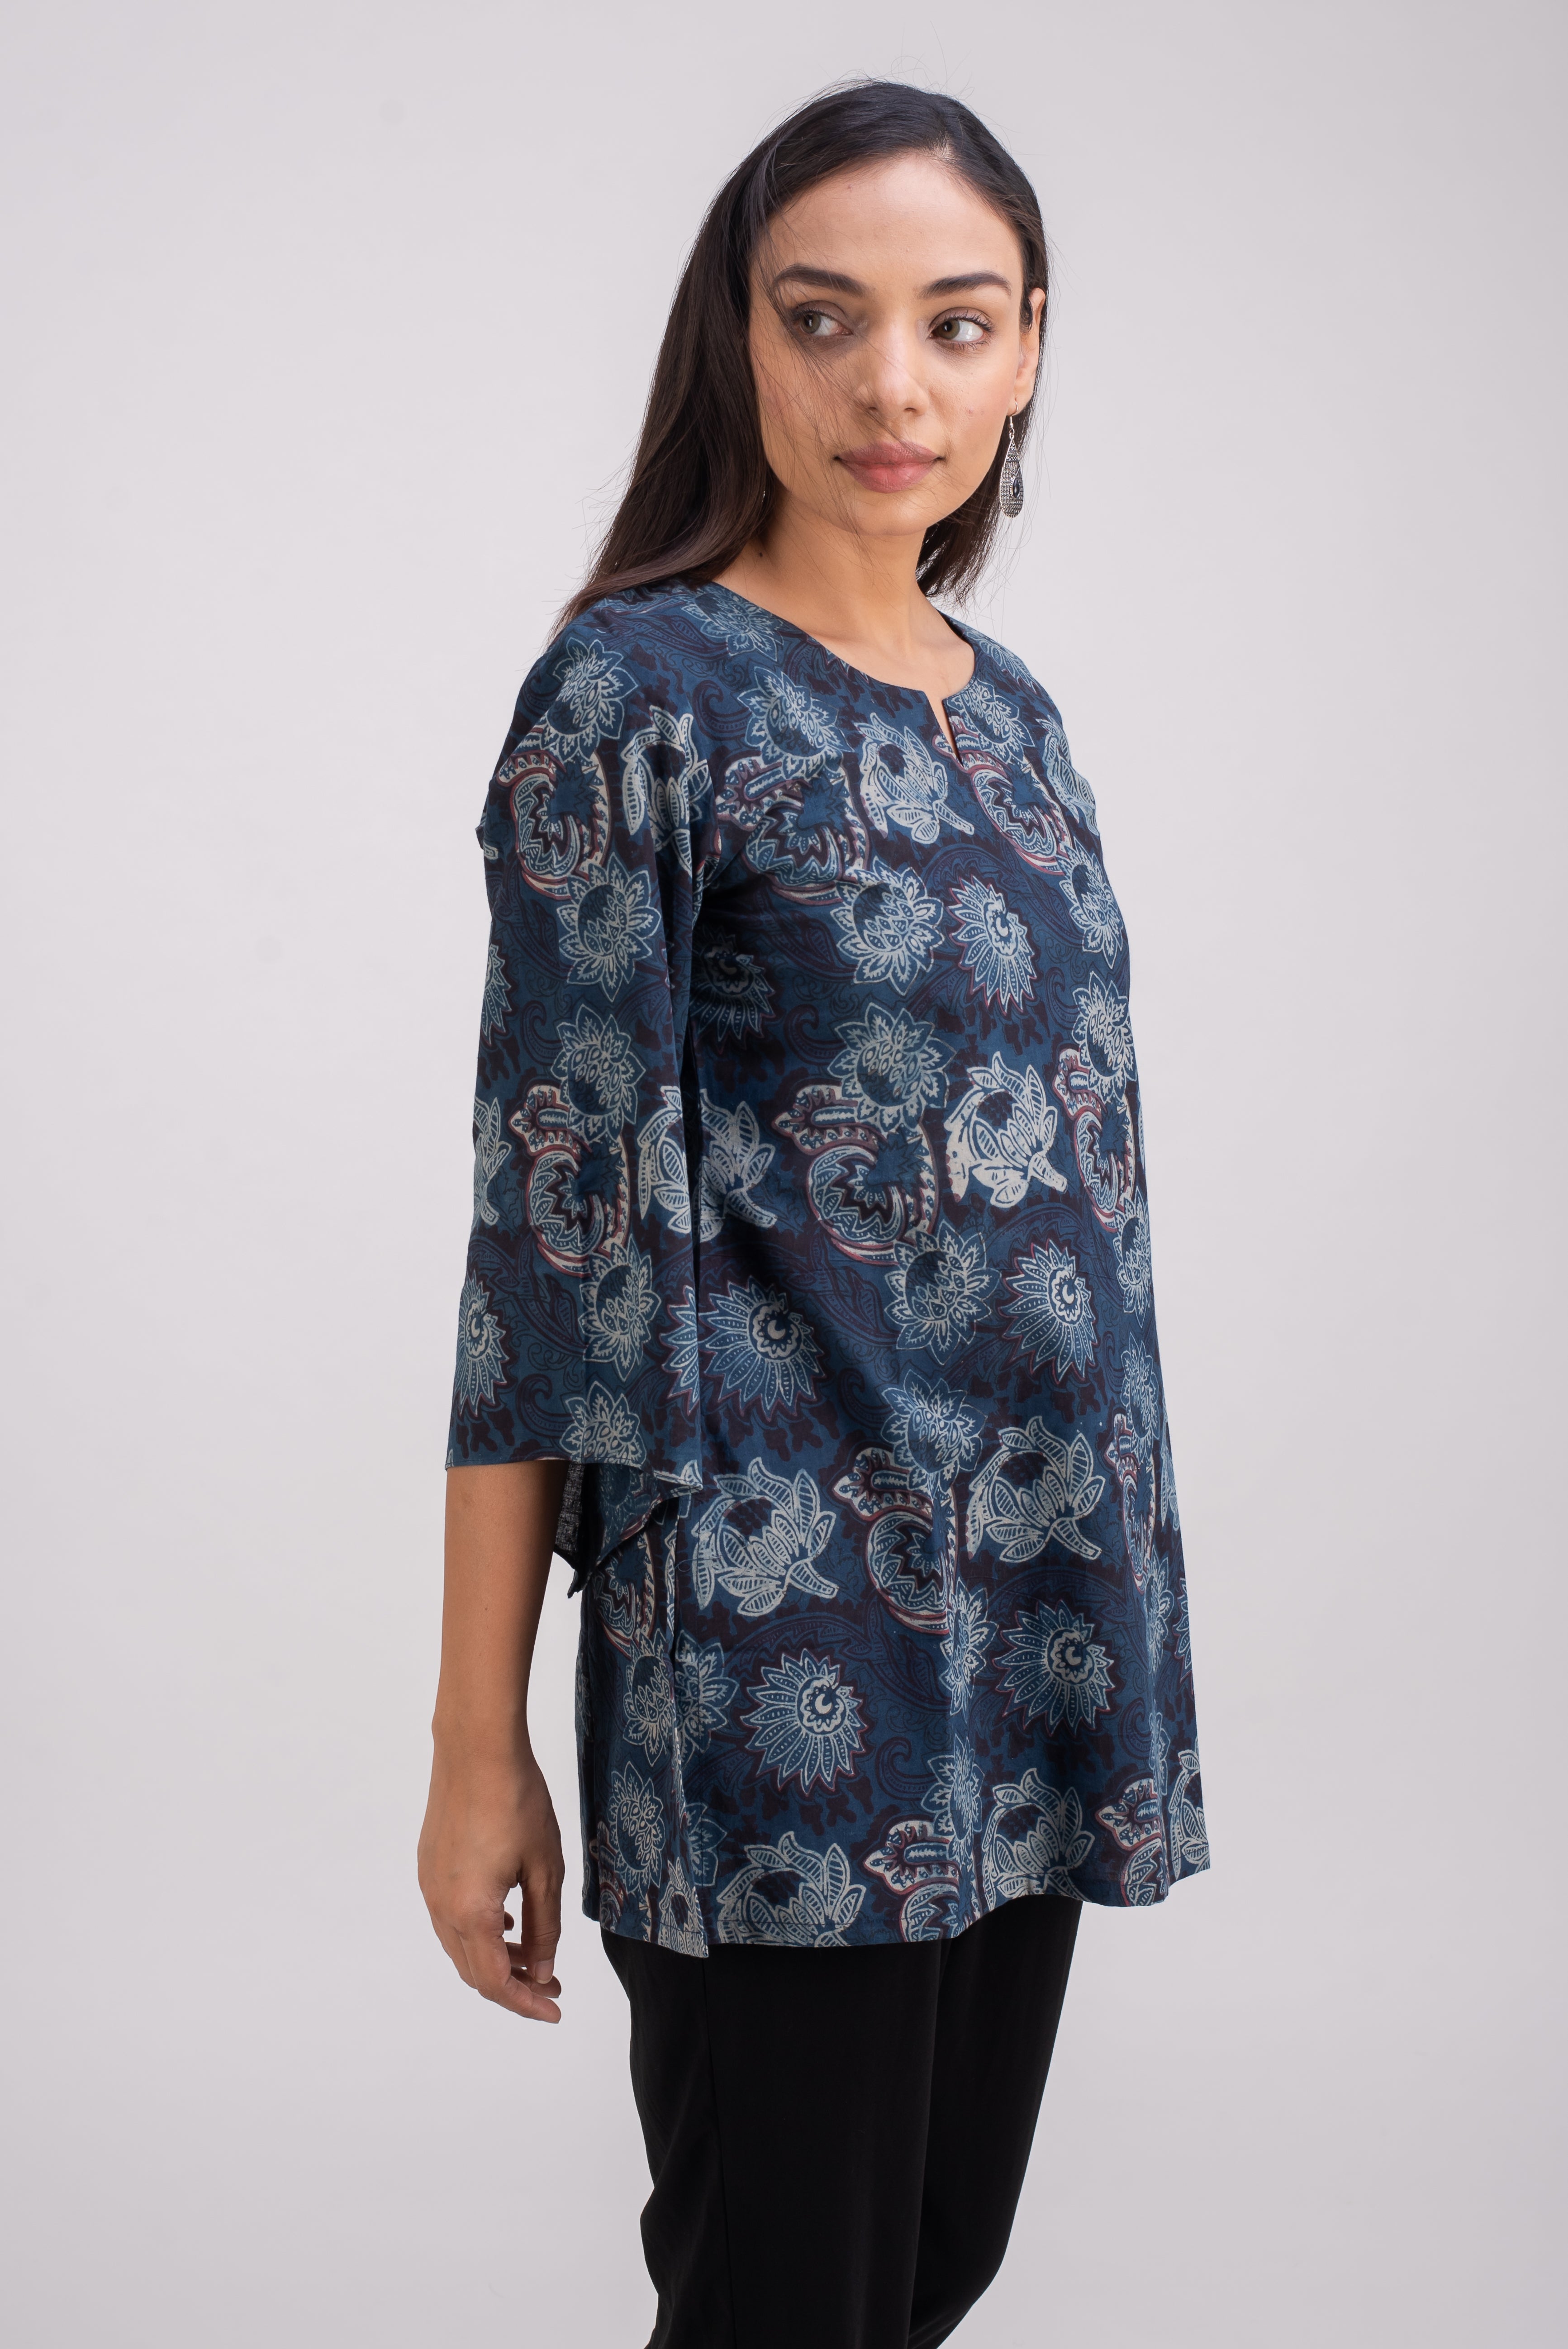 501-101 "Bell" Tunic Top